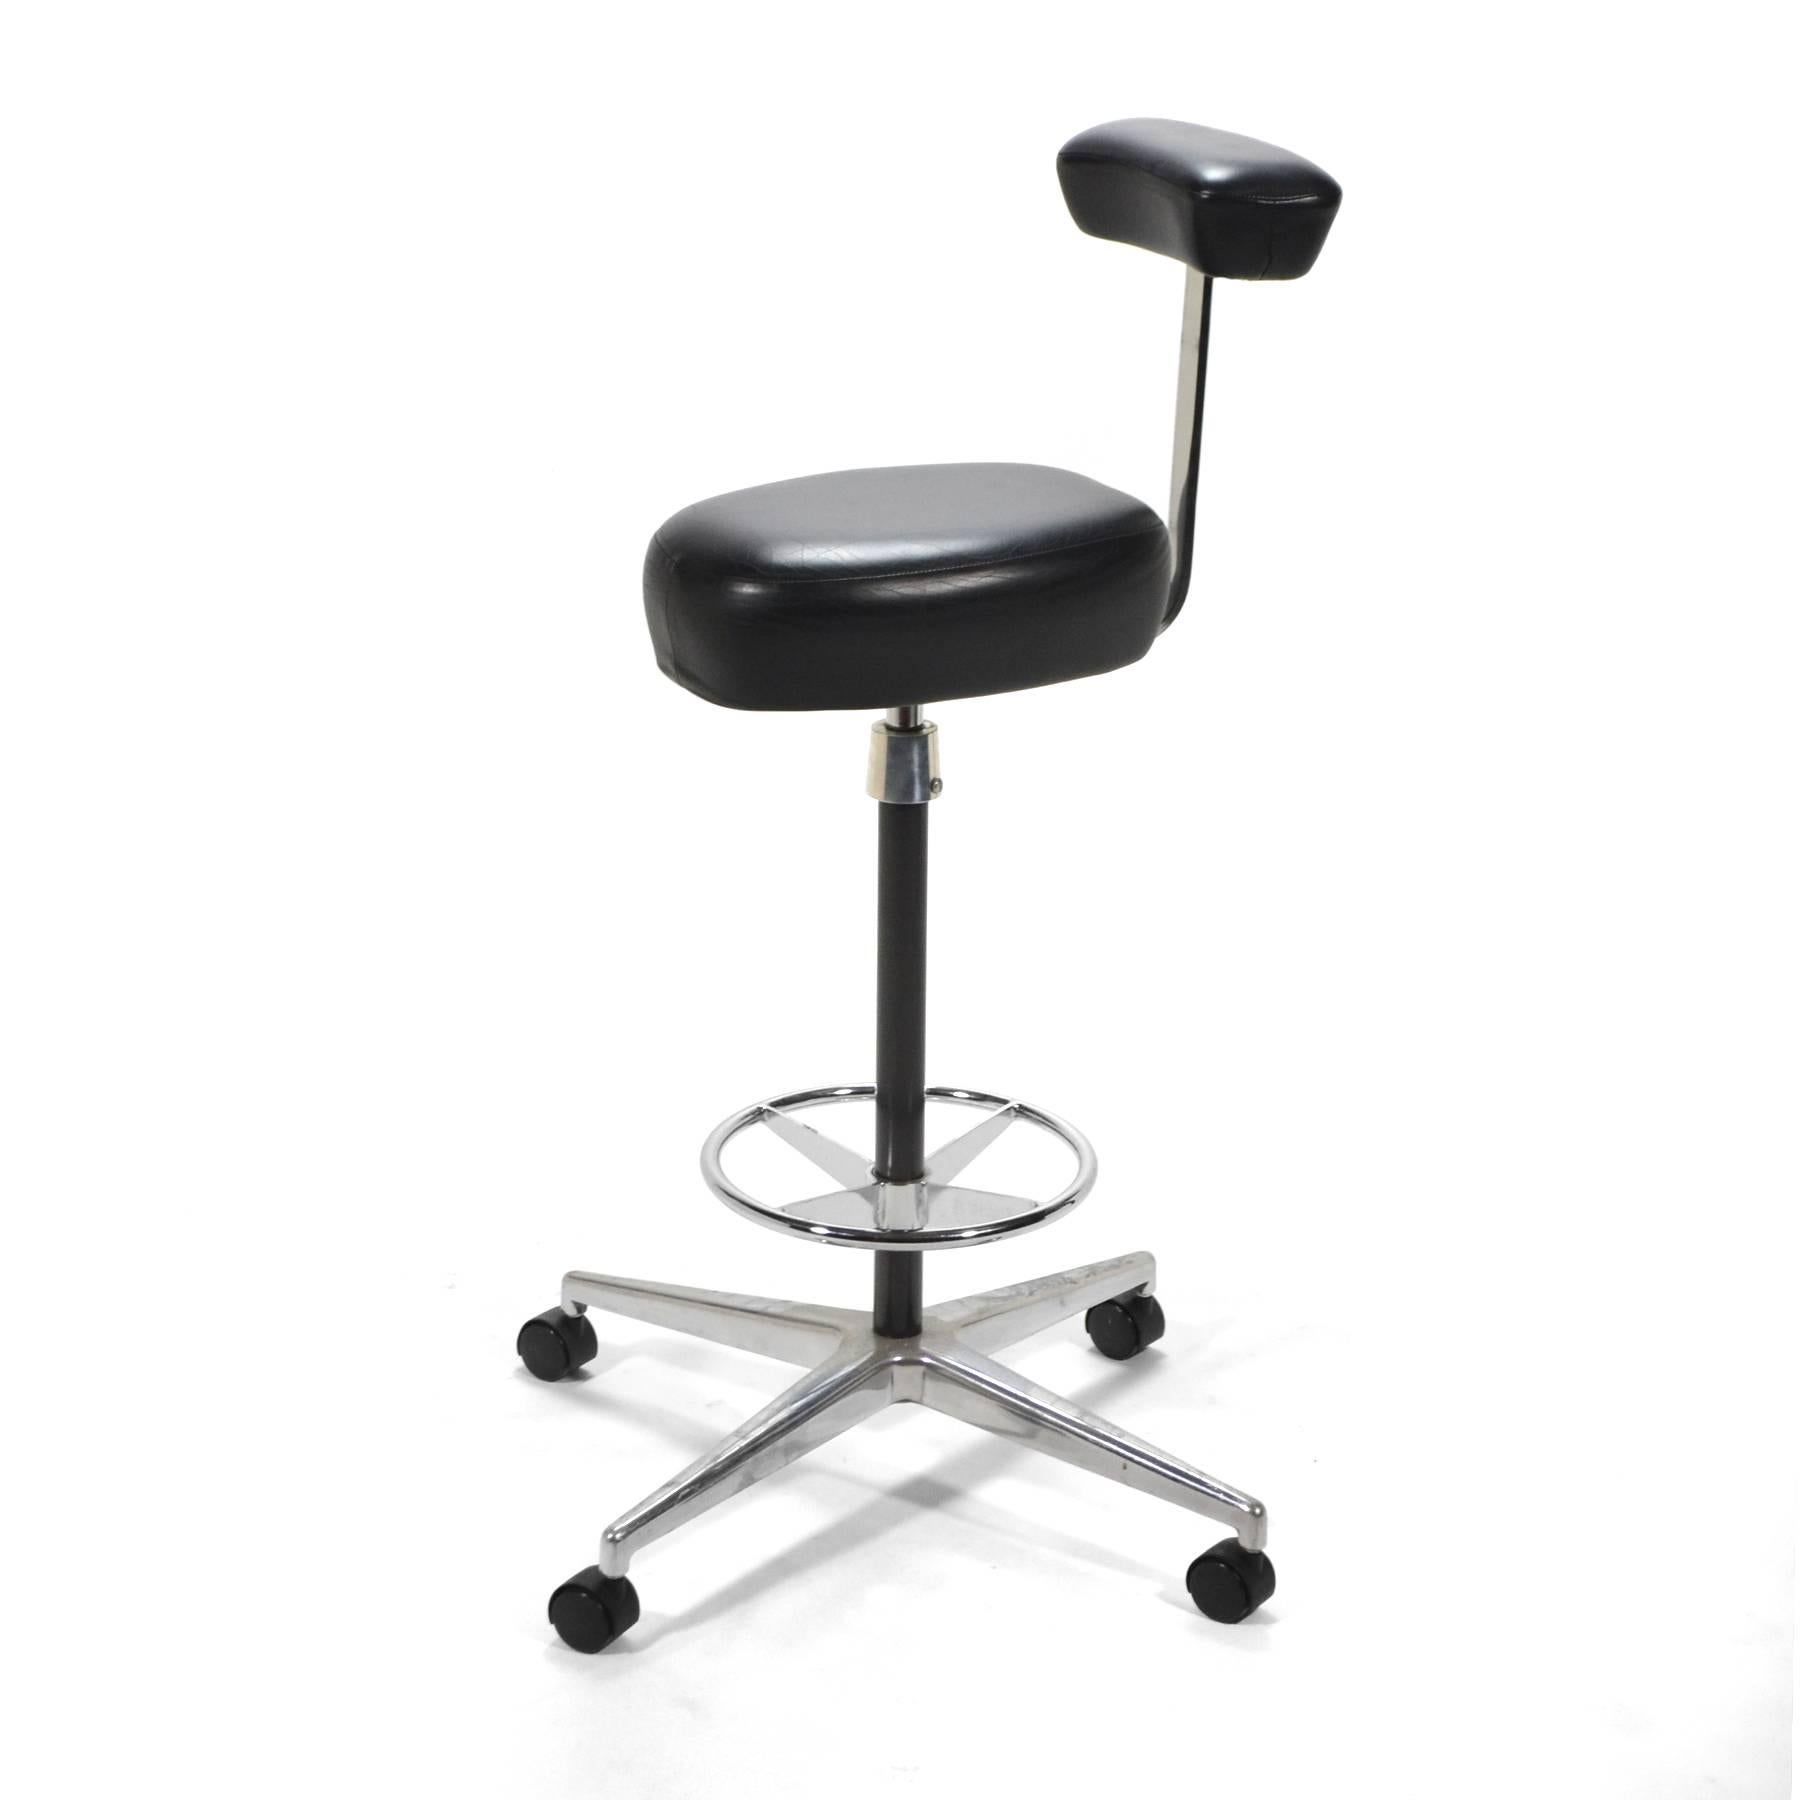 American George Nelson Perch by Herman Miller